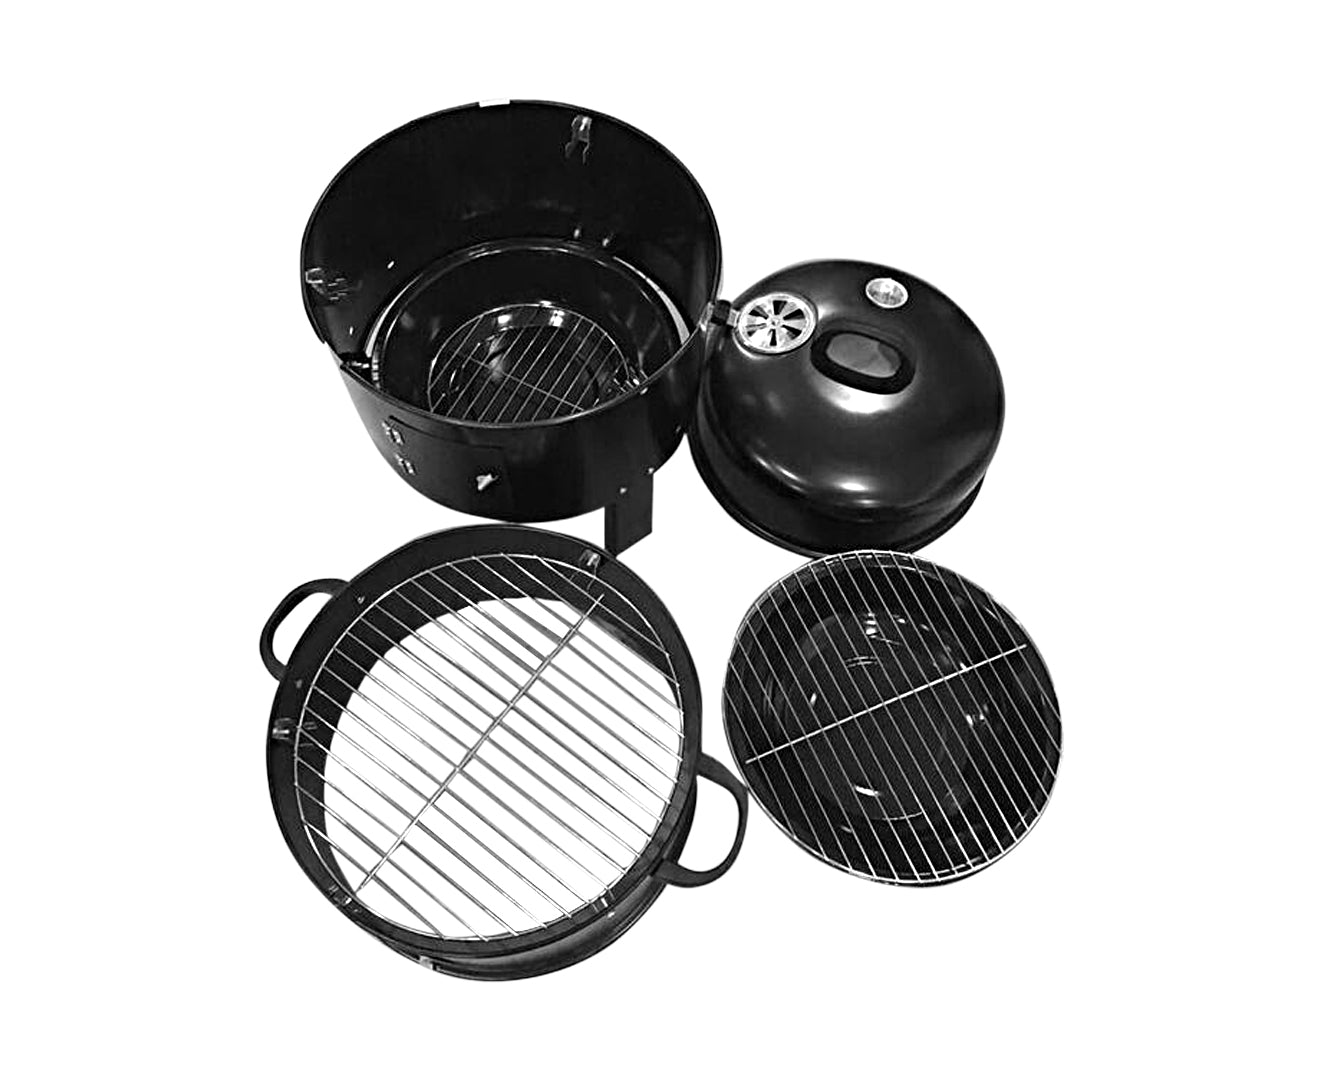 Premium 2X 3 in 1 Barbecue Smoker Outdoor Charcoal BBQ Grill Camping Picnic Fishing - image3